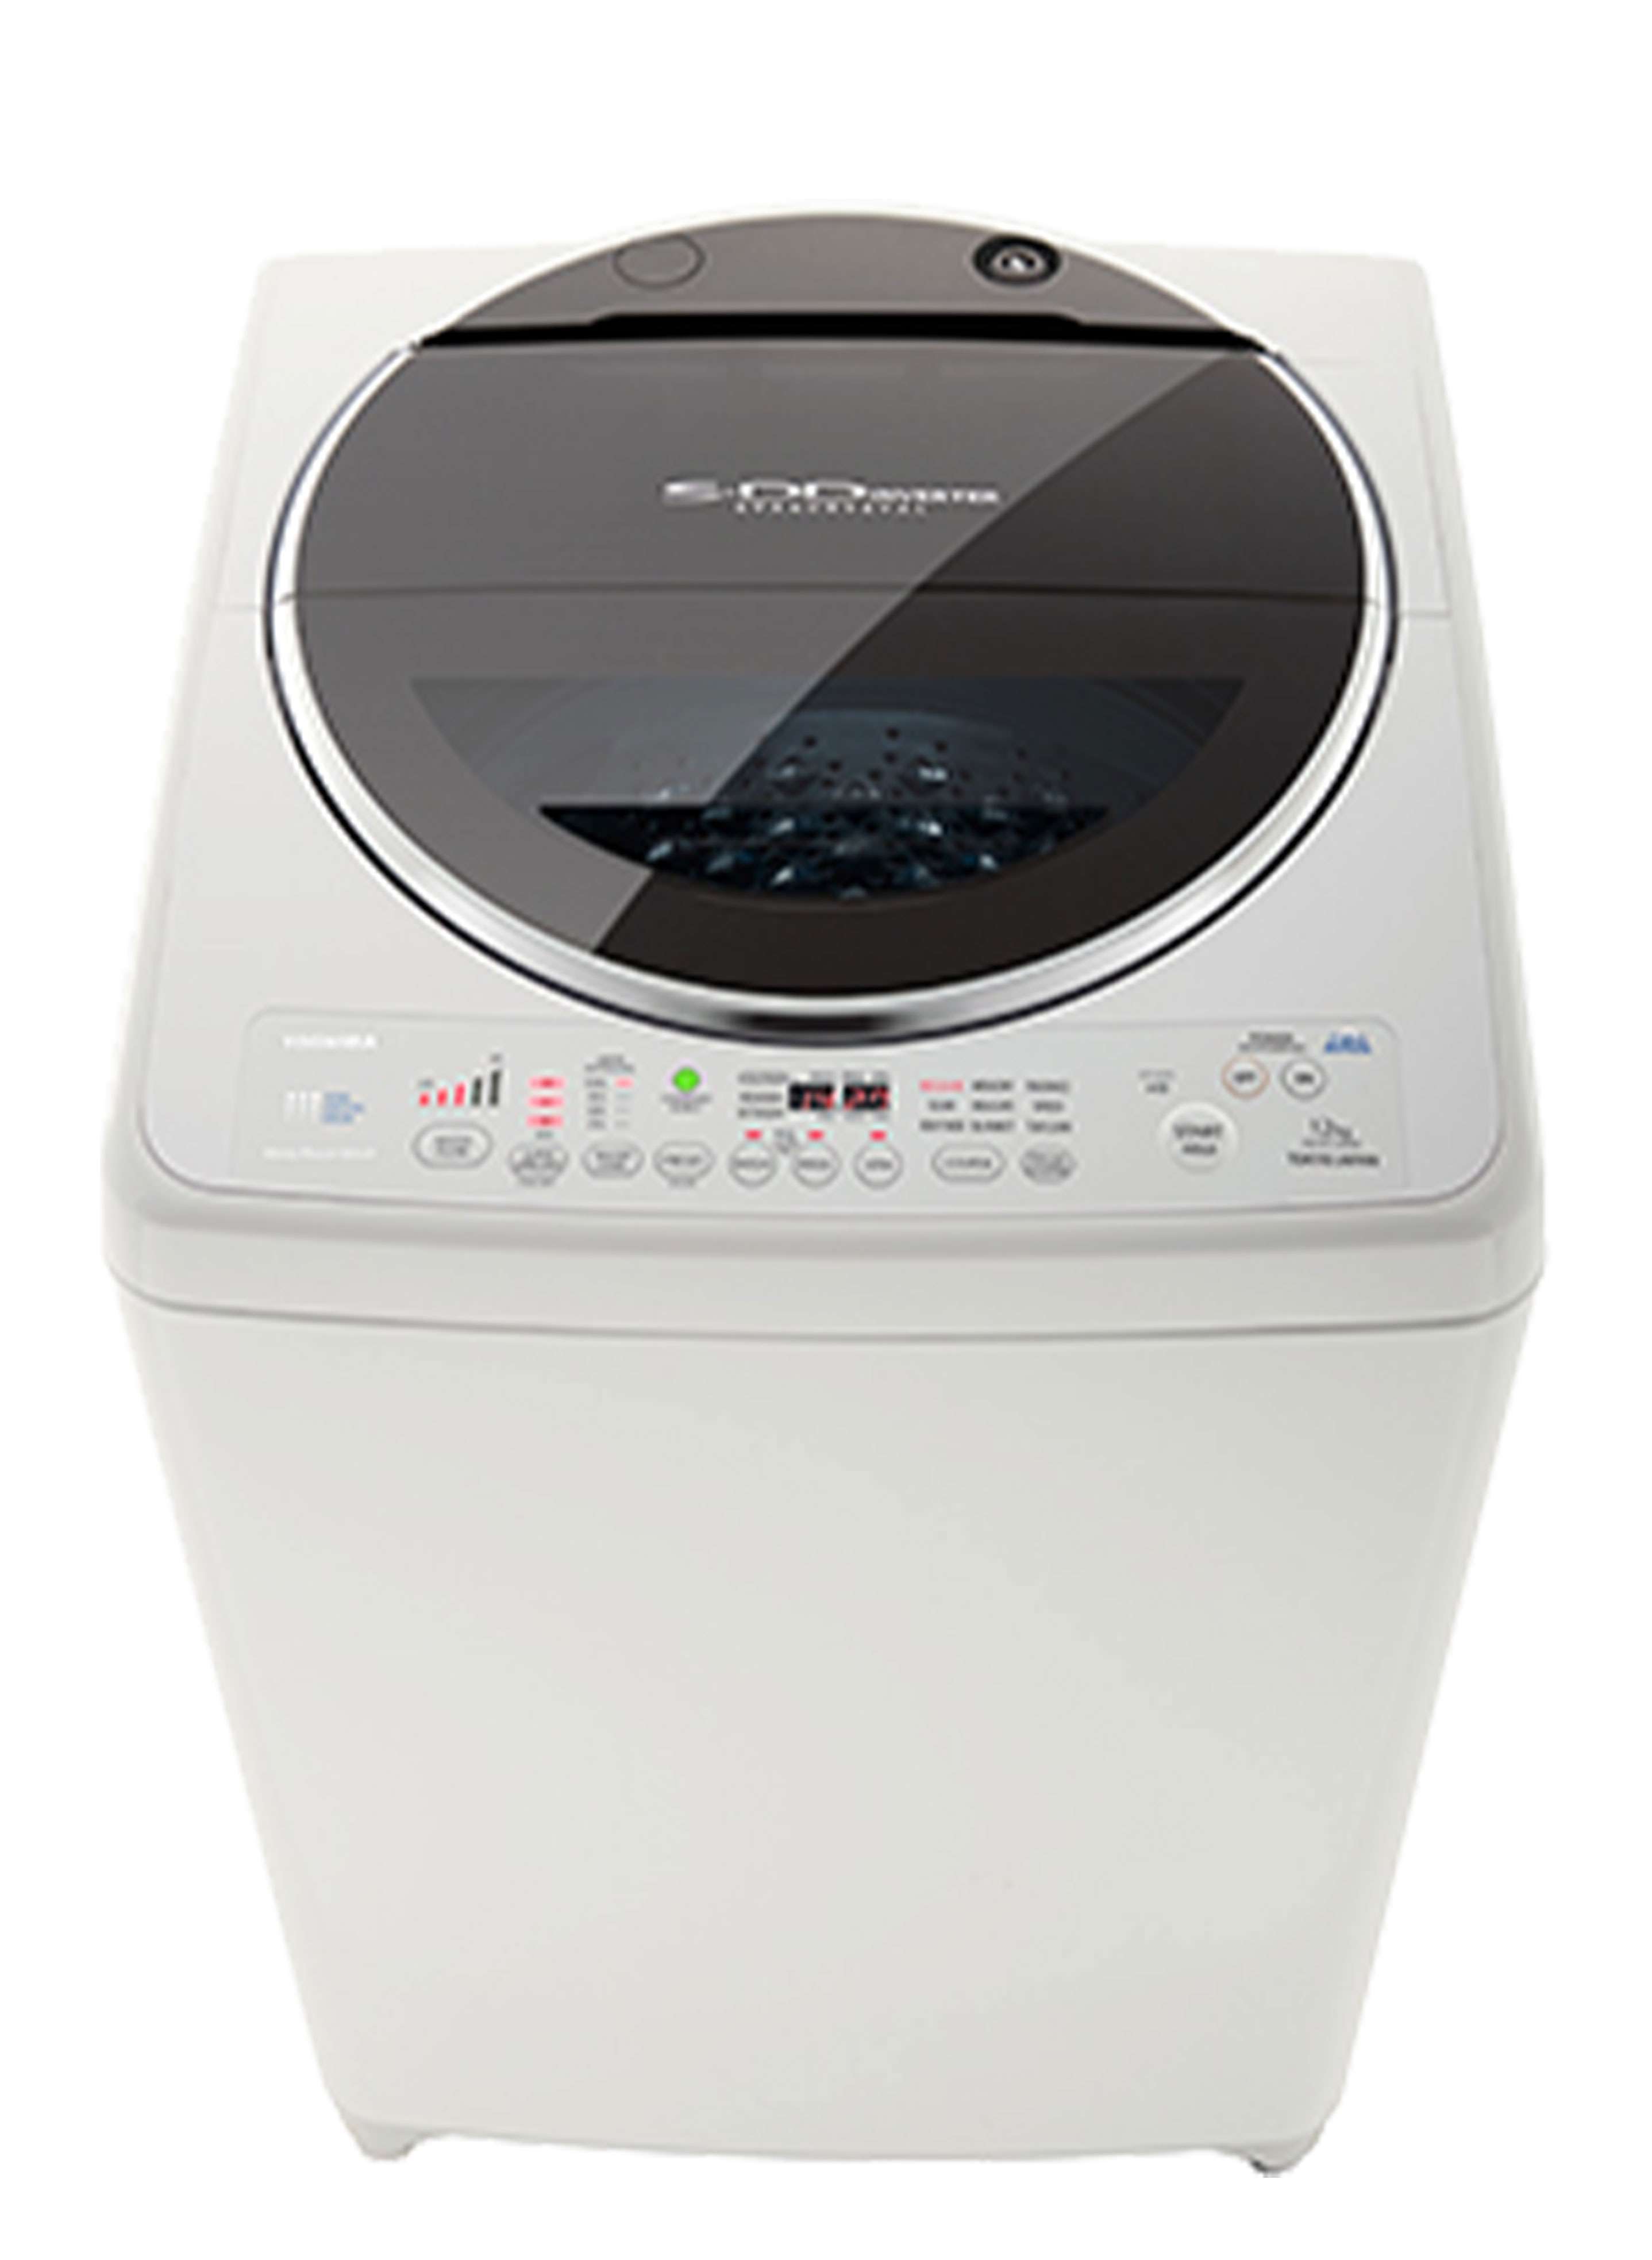 12 KG Top Load Washing Machine | Toshiba Middle East